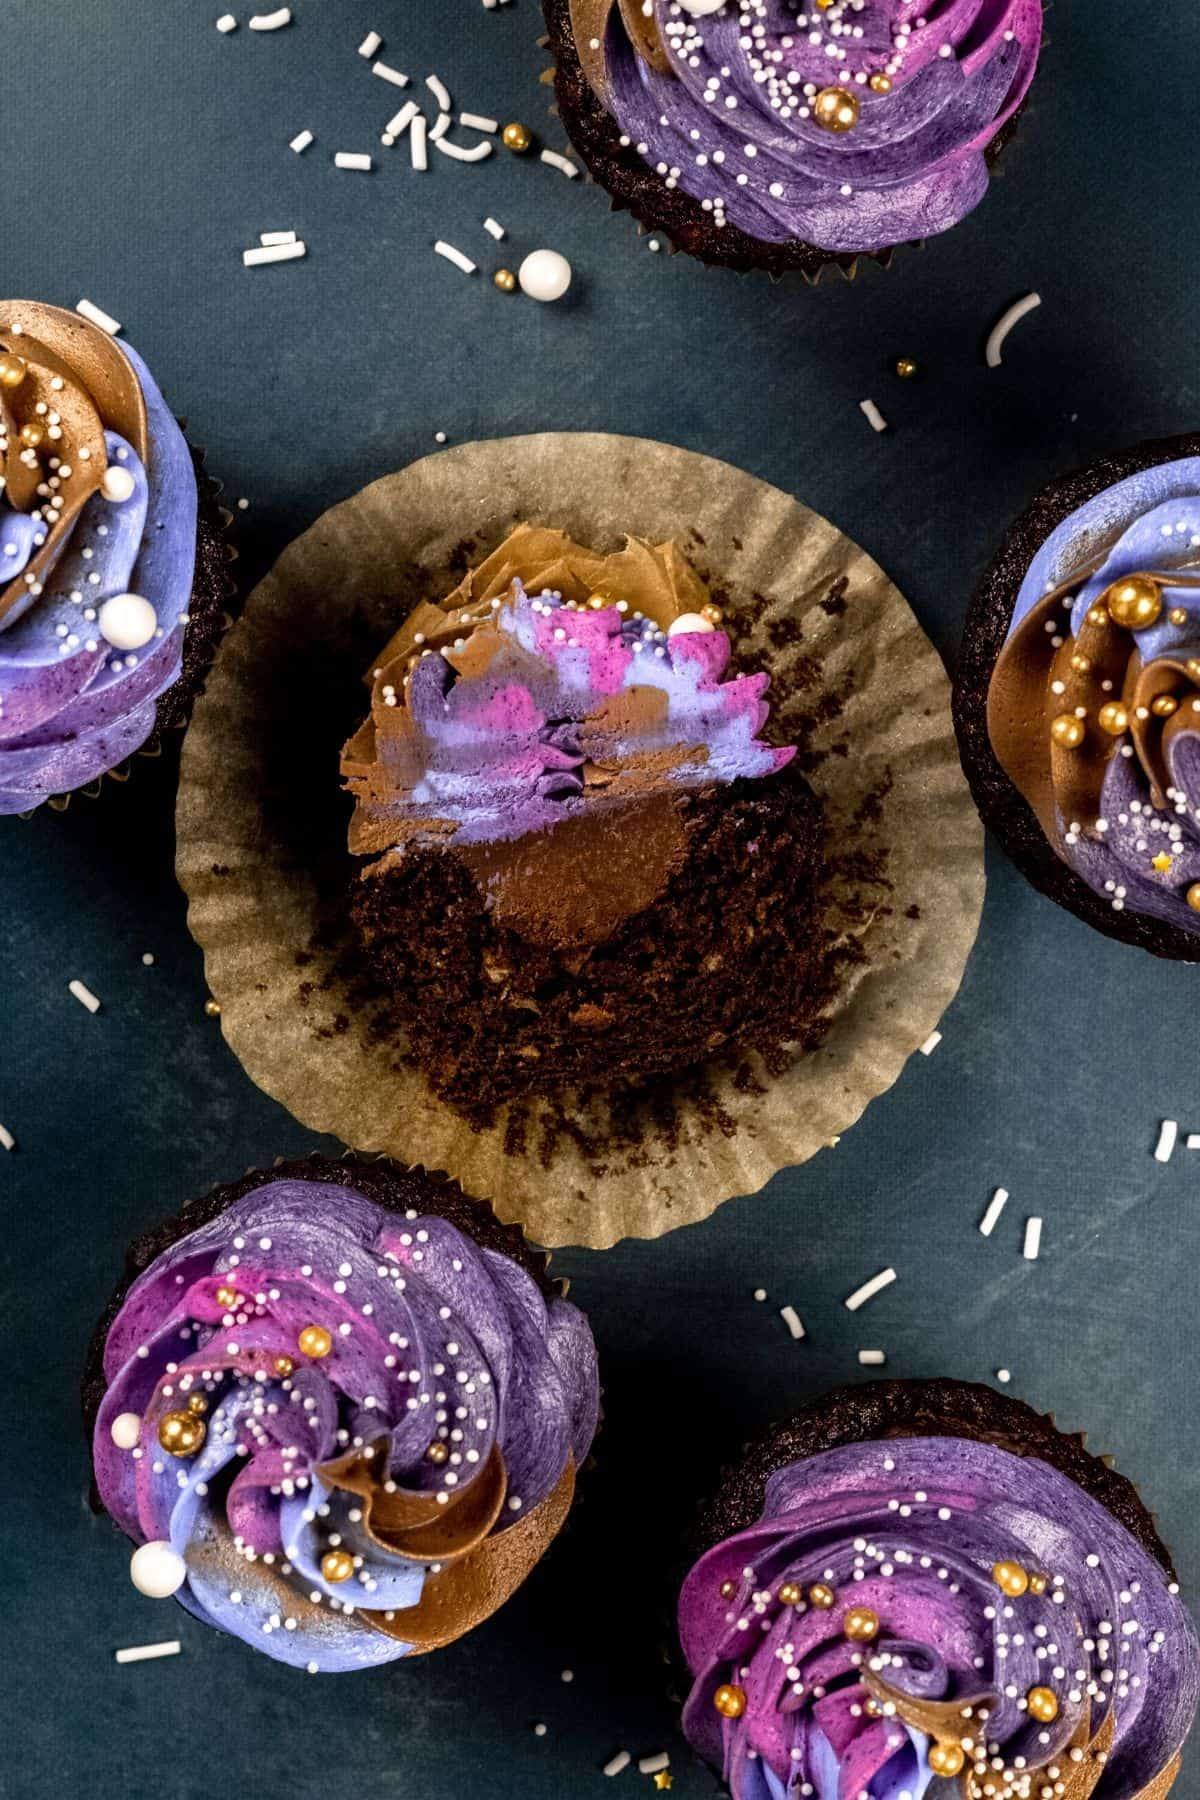 Looking down at a chocolate cupcake filled with chocolate ganache and lots of colorful swirled frosting on top. Sprinkles and other cupcakes surround this one that is cut in half and laying down on its side.